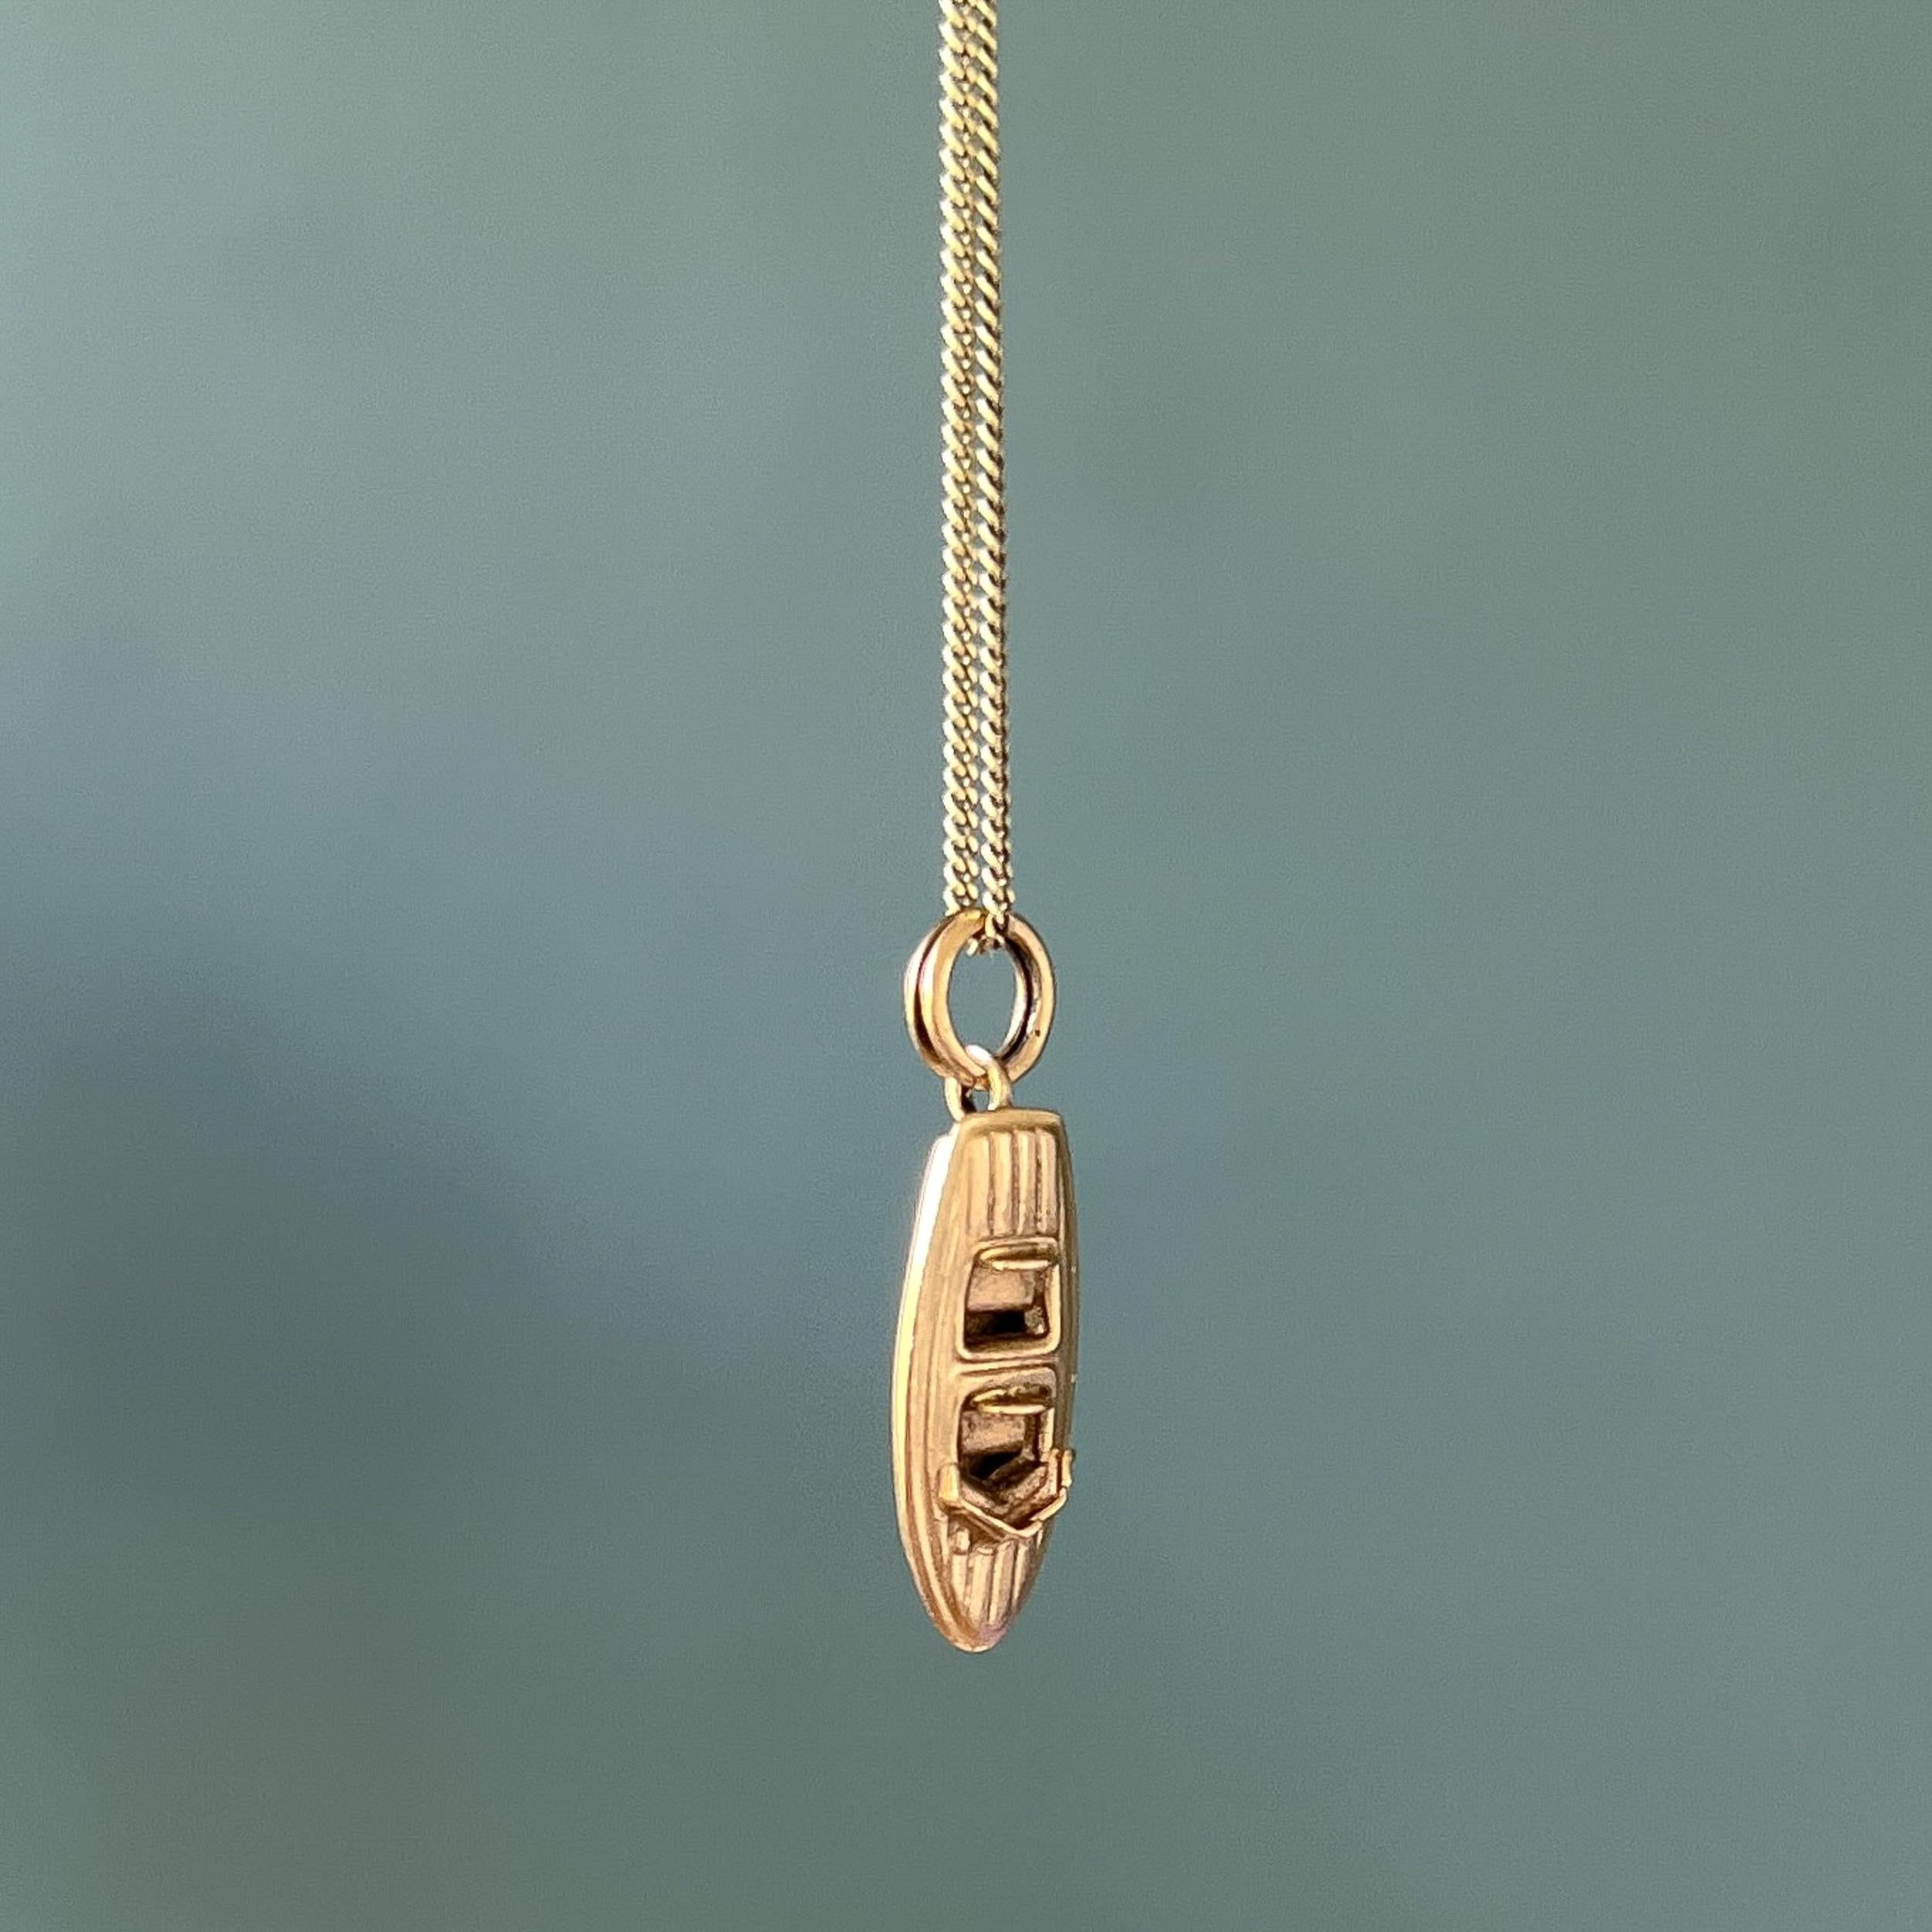 Vintage 18K Gold 1960's Italian Speedboat Charm Pendant In Good Condition For Sale In Rotterdam, NL